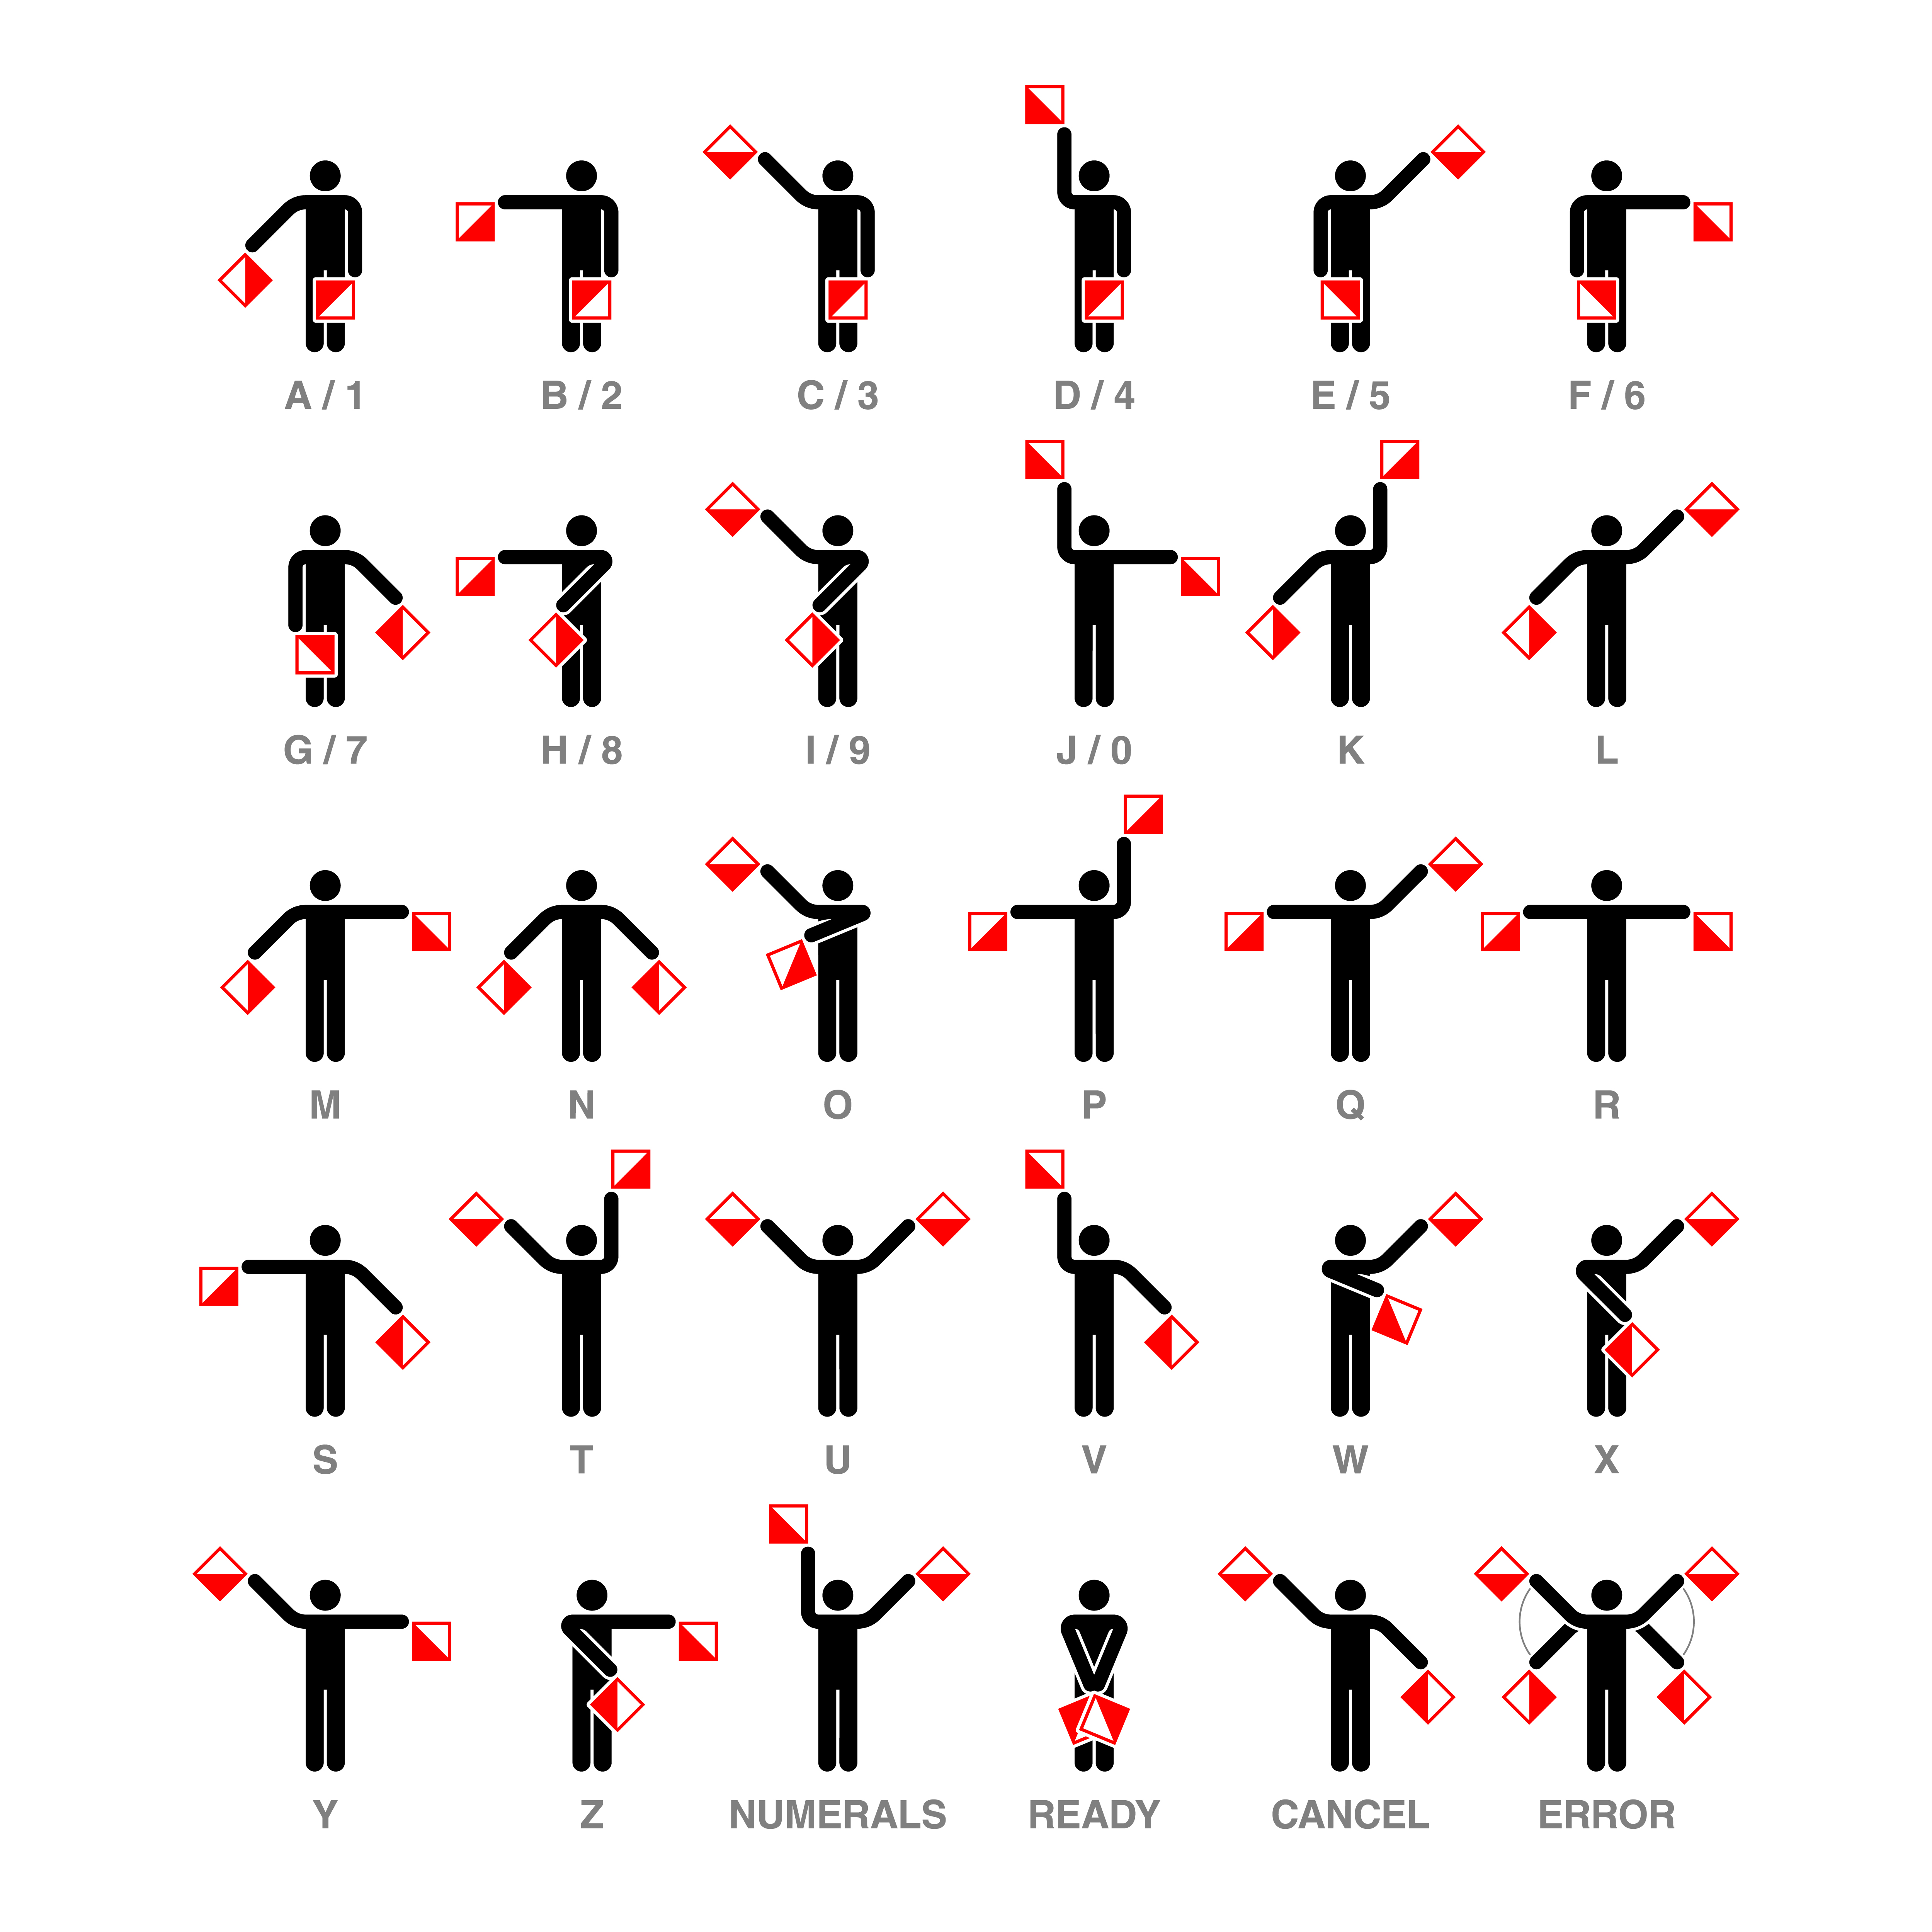 Blog - A Hidden Language: The Meaning of Semaphore